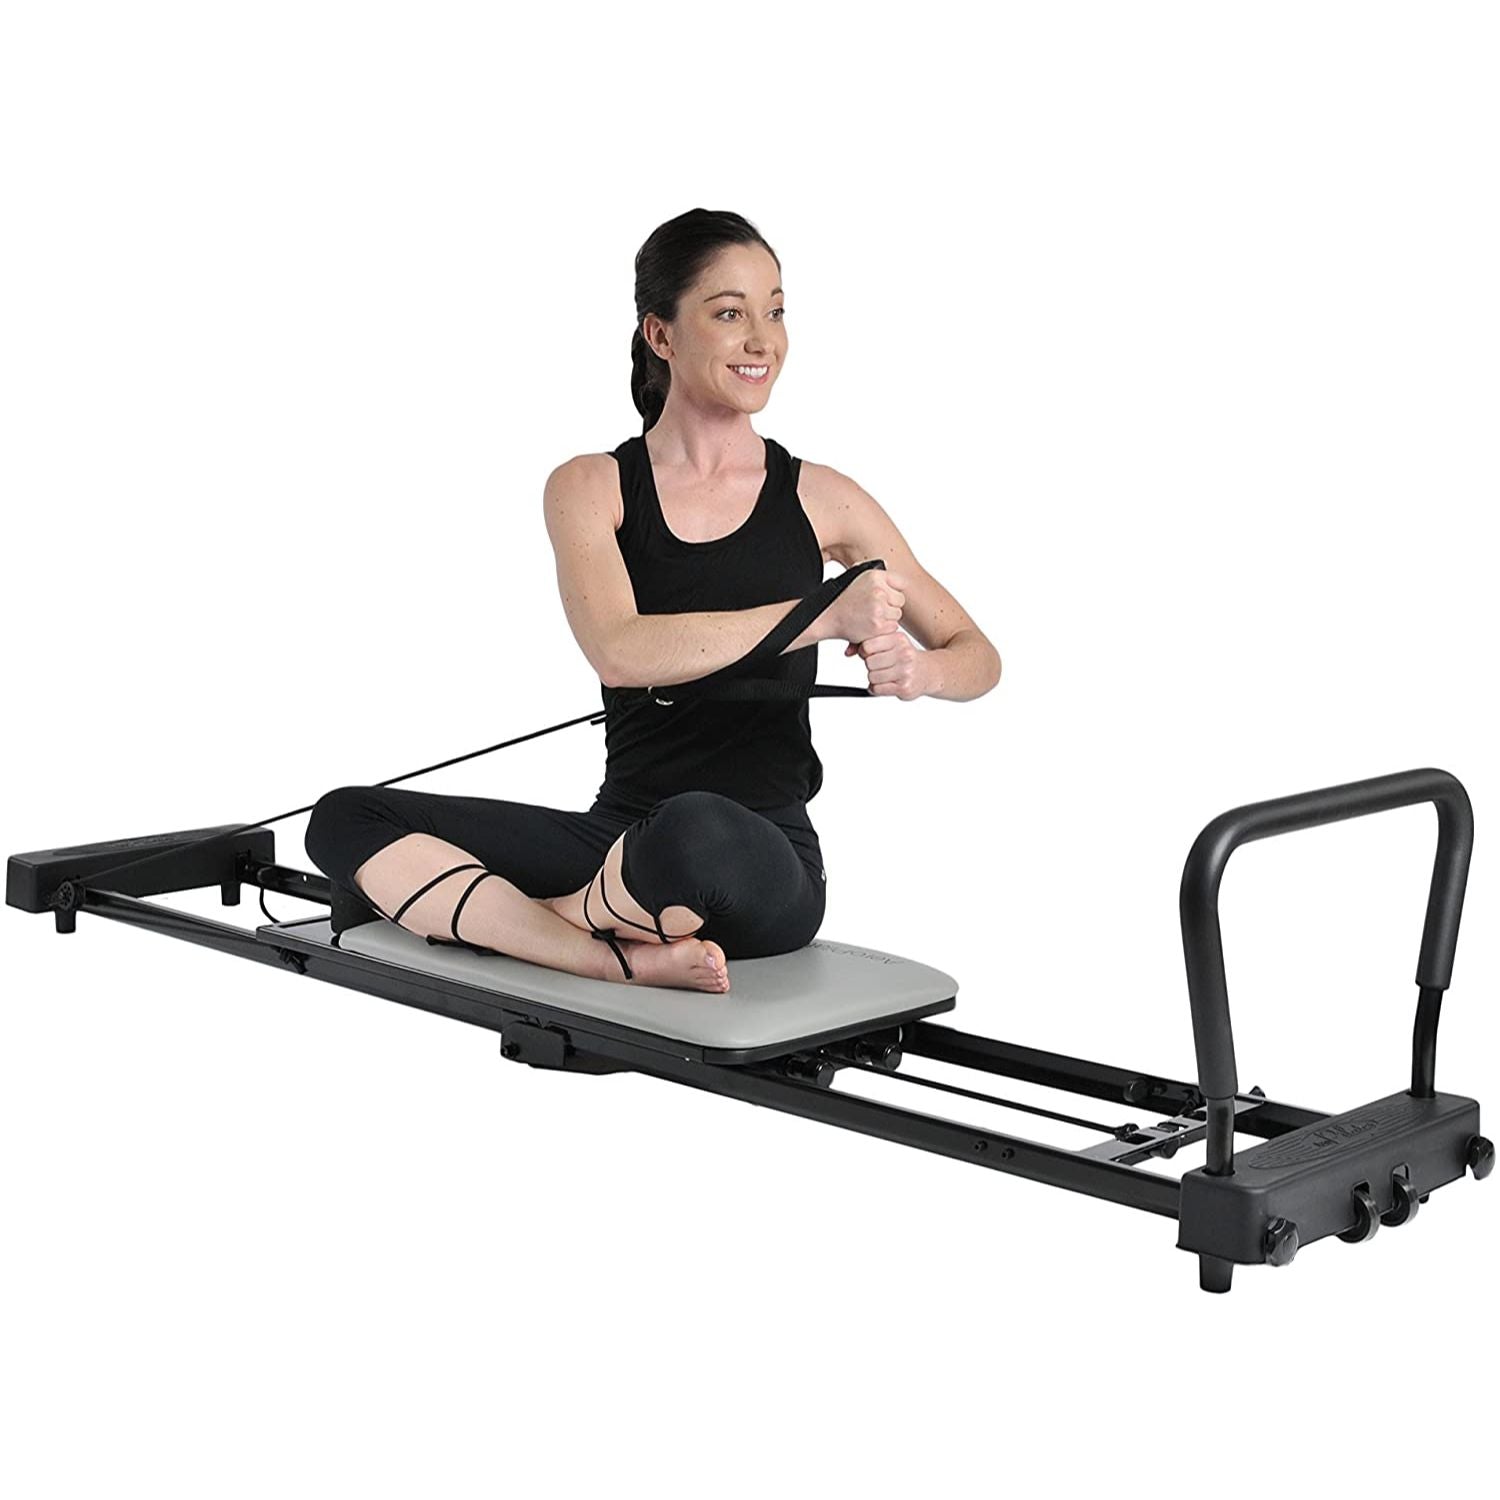 AeroPilates Reformer 287 - Pilates Reformer Workout Machine for Home Gym - Pilates  Reformer with 3 Resistance Cords - Up to 300 lbs Weight Capacity, Reformers  -  Canada